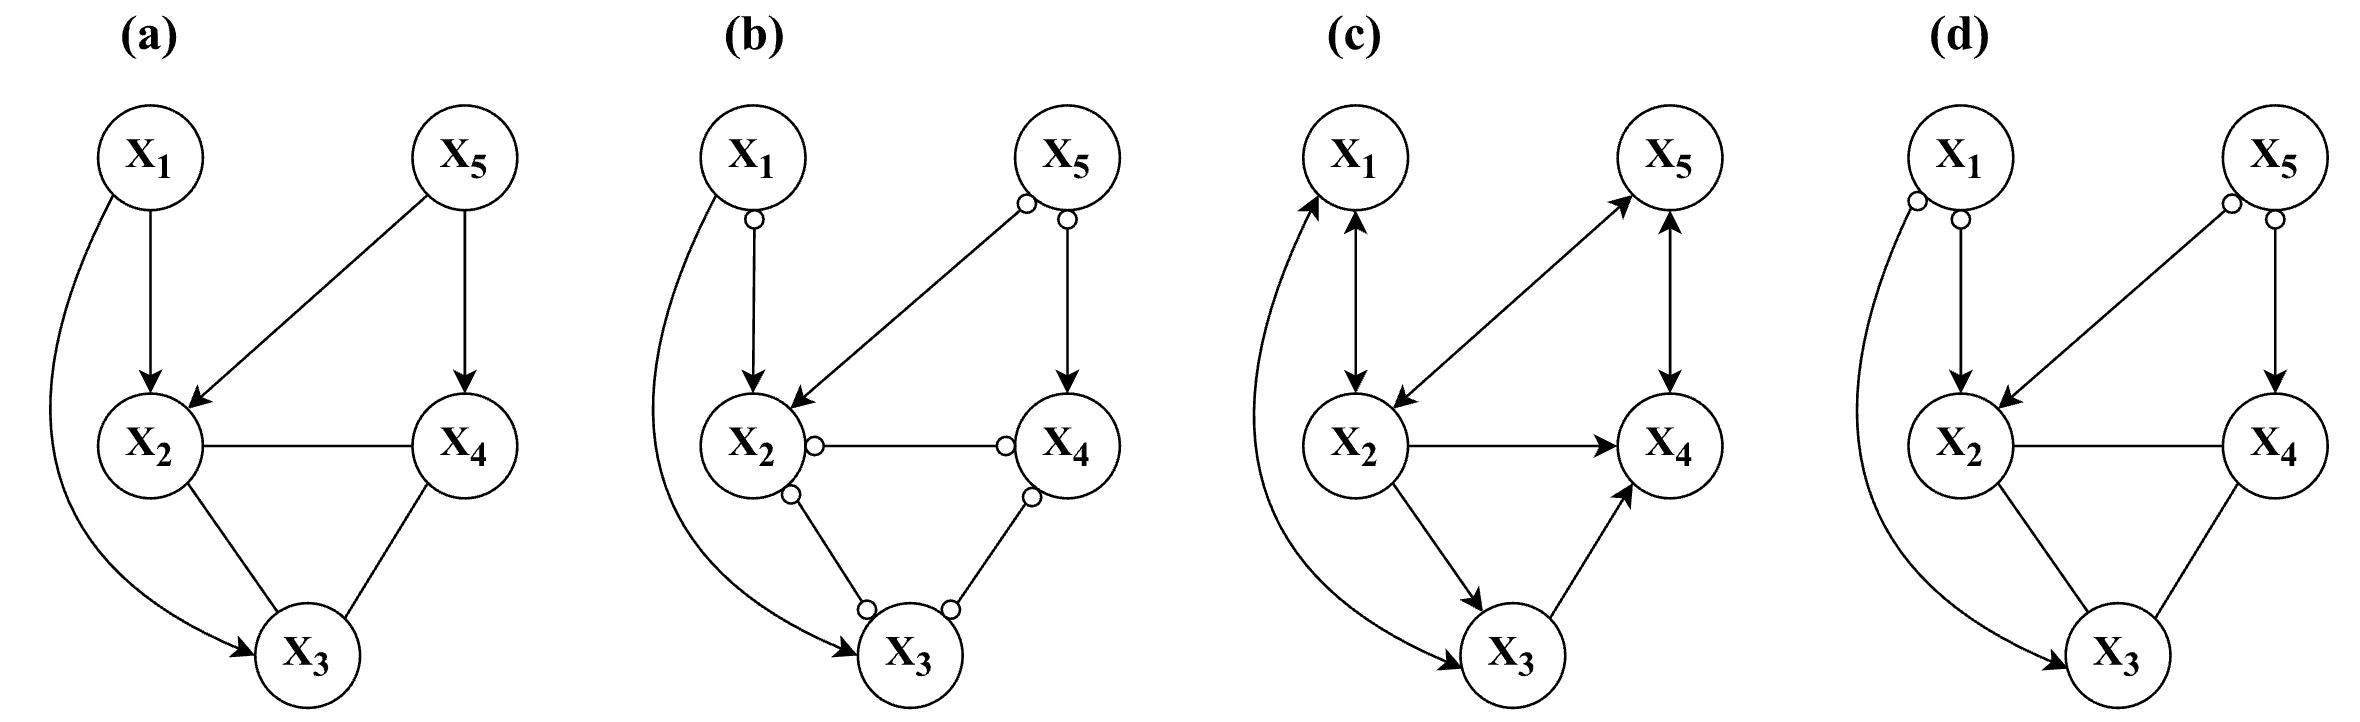 Visualization of frequently estimated partial ancestral graphs in sparse network conditions.